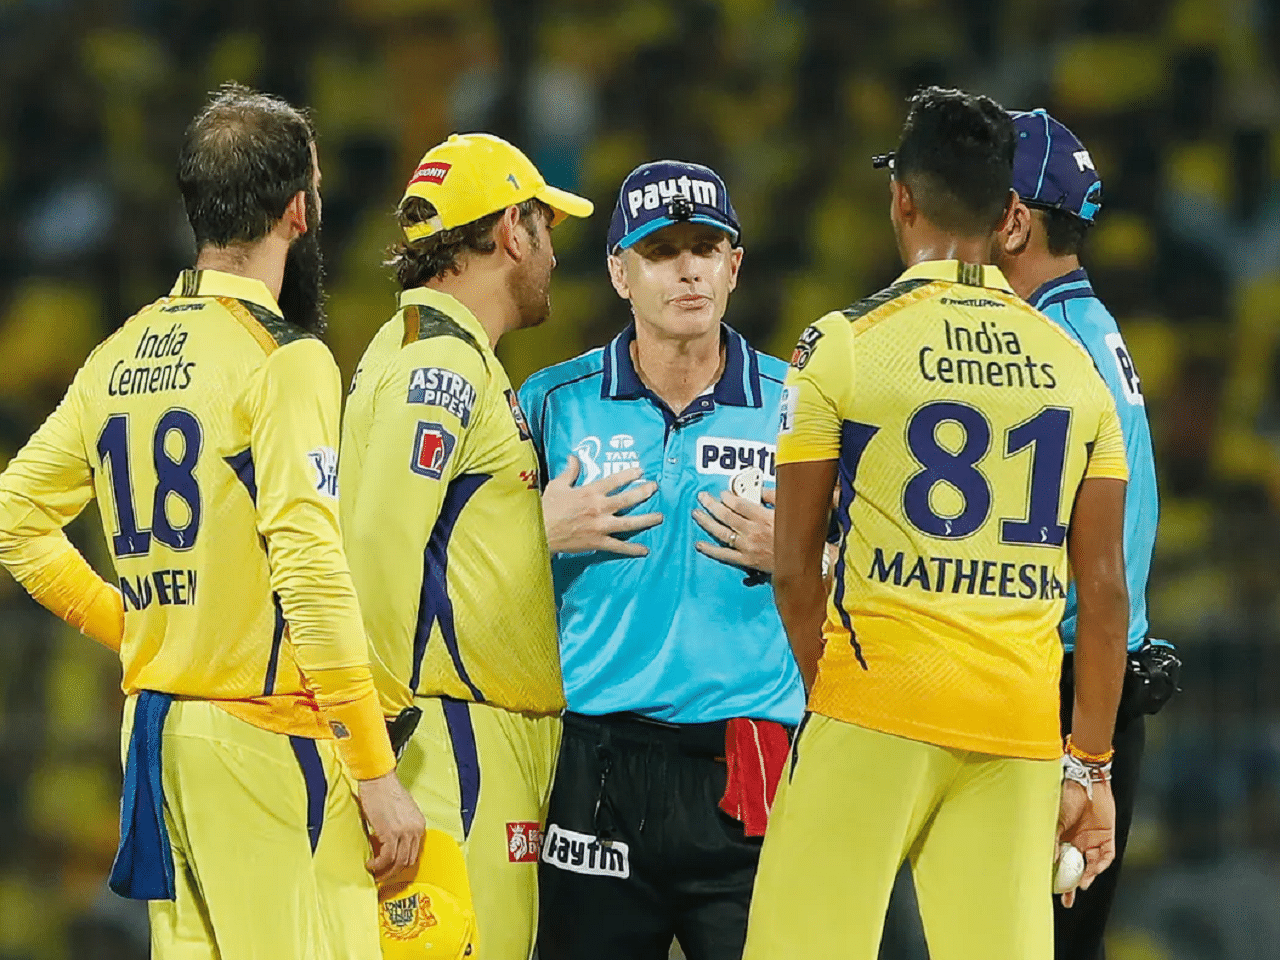 ‘Some people are bigger than the law’: Former umpire slams MS Dhoni for his ‘time wasting’ tactics in IPL 1st Qualifier vs GT